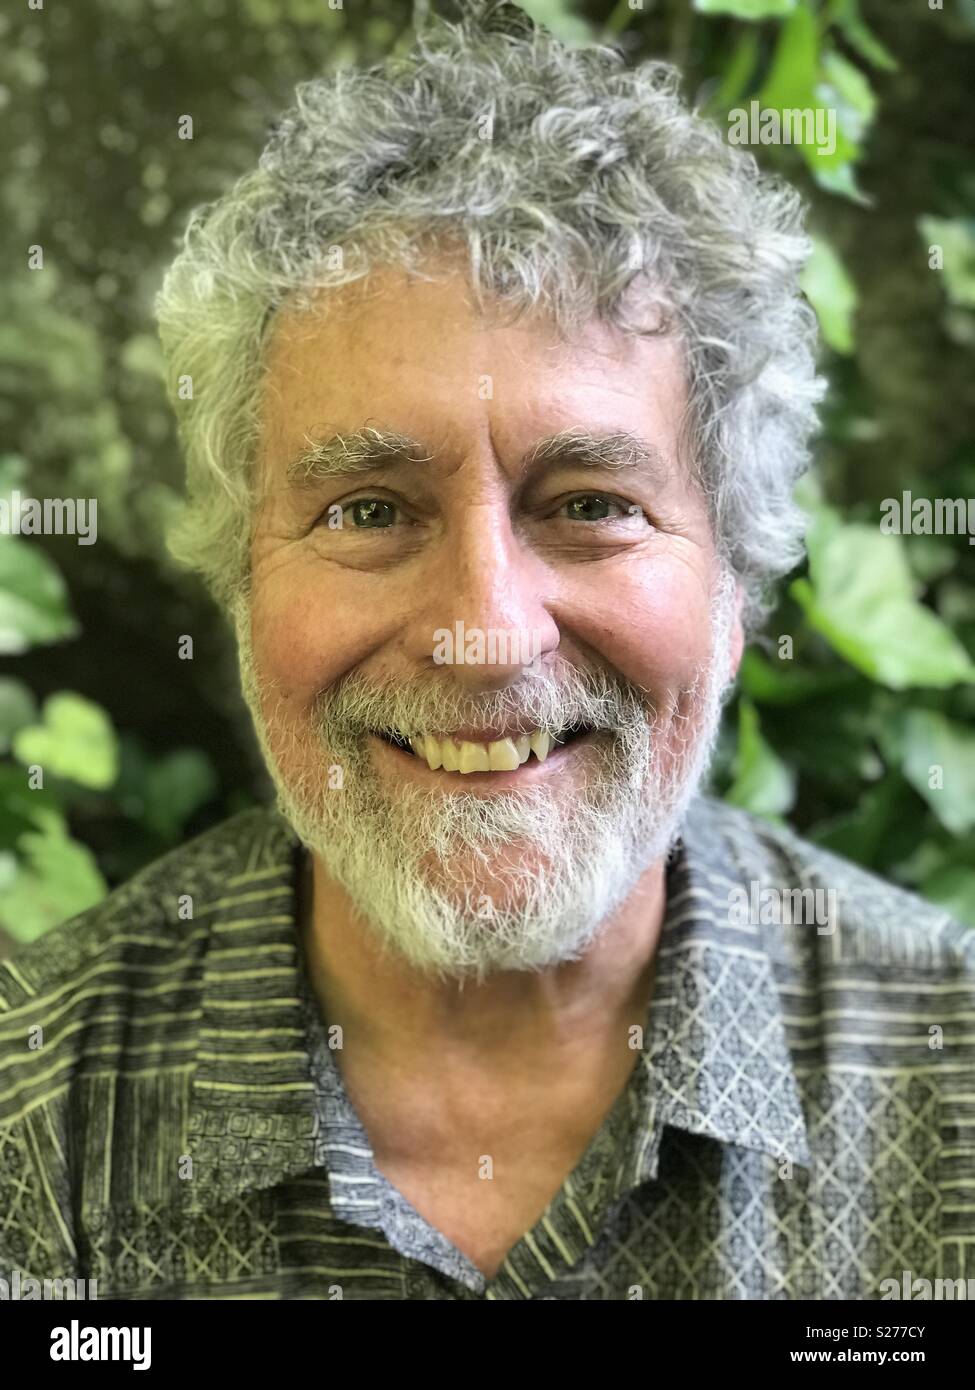 Caucasian man, age 66, with graying beard and hair Stock Photo